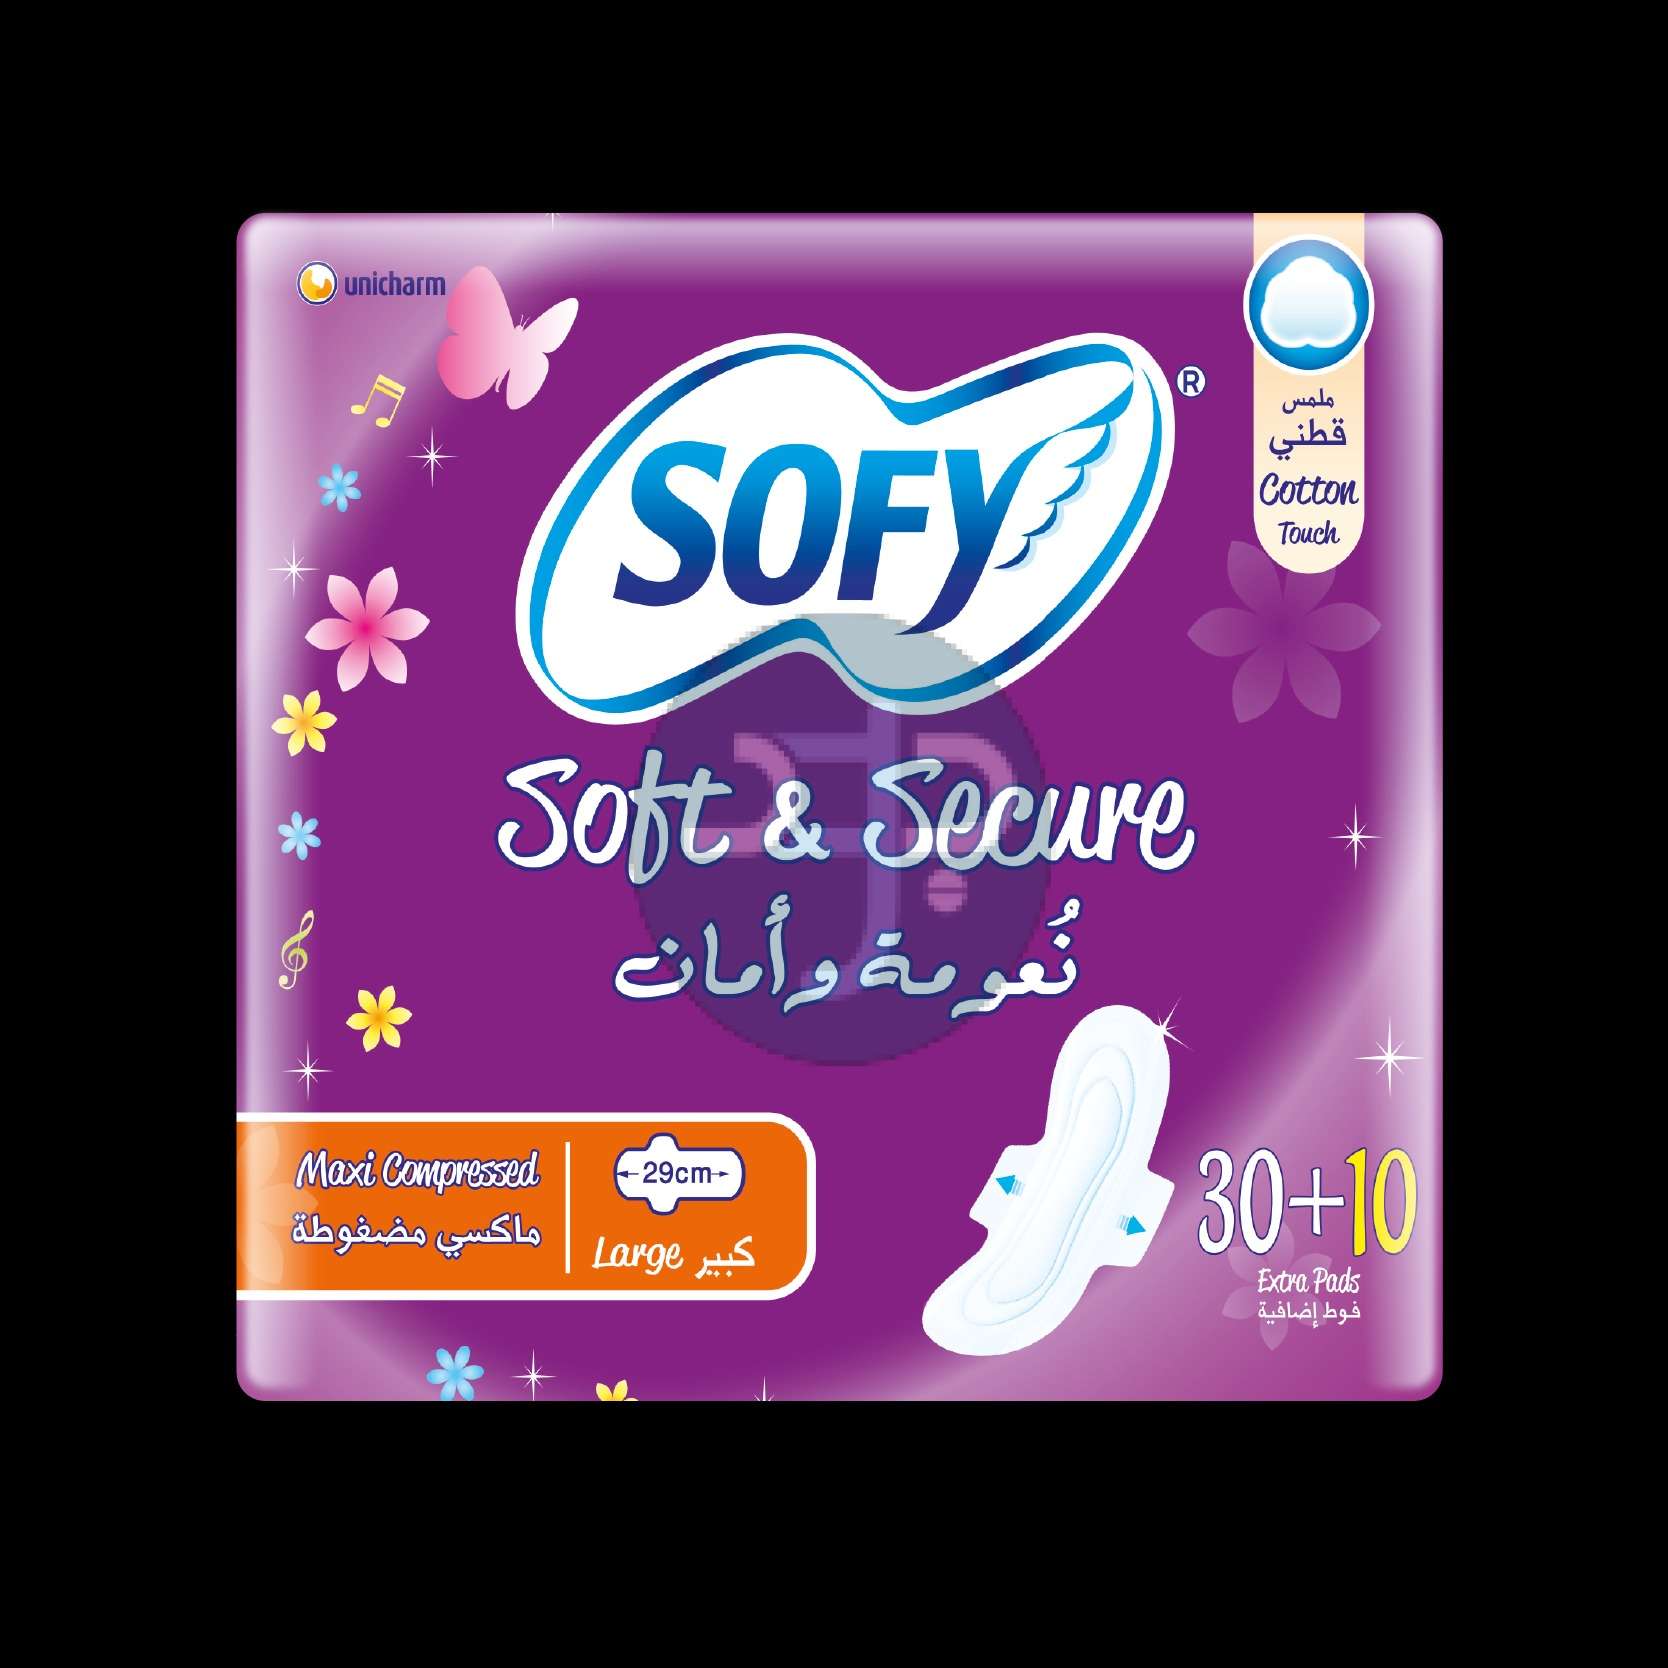 Product-SOFY Soft & Secure Sanitary Pads with Wings, Maxi Compressed, Large 29 cm, Pack of 40 Pads (30 + 10 Free)